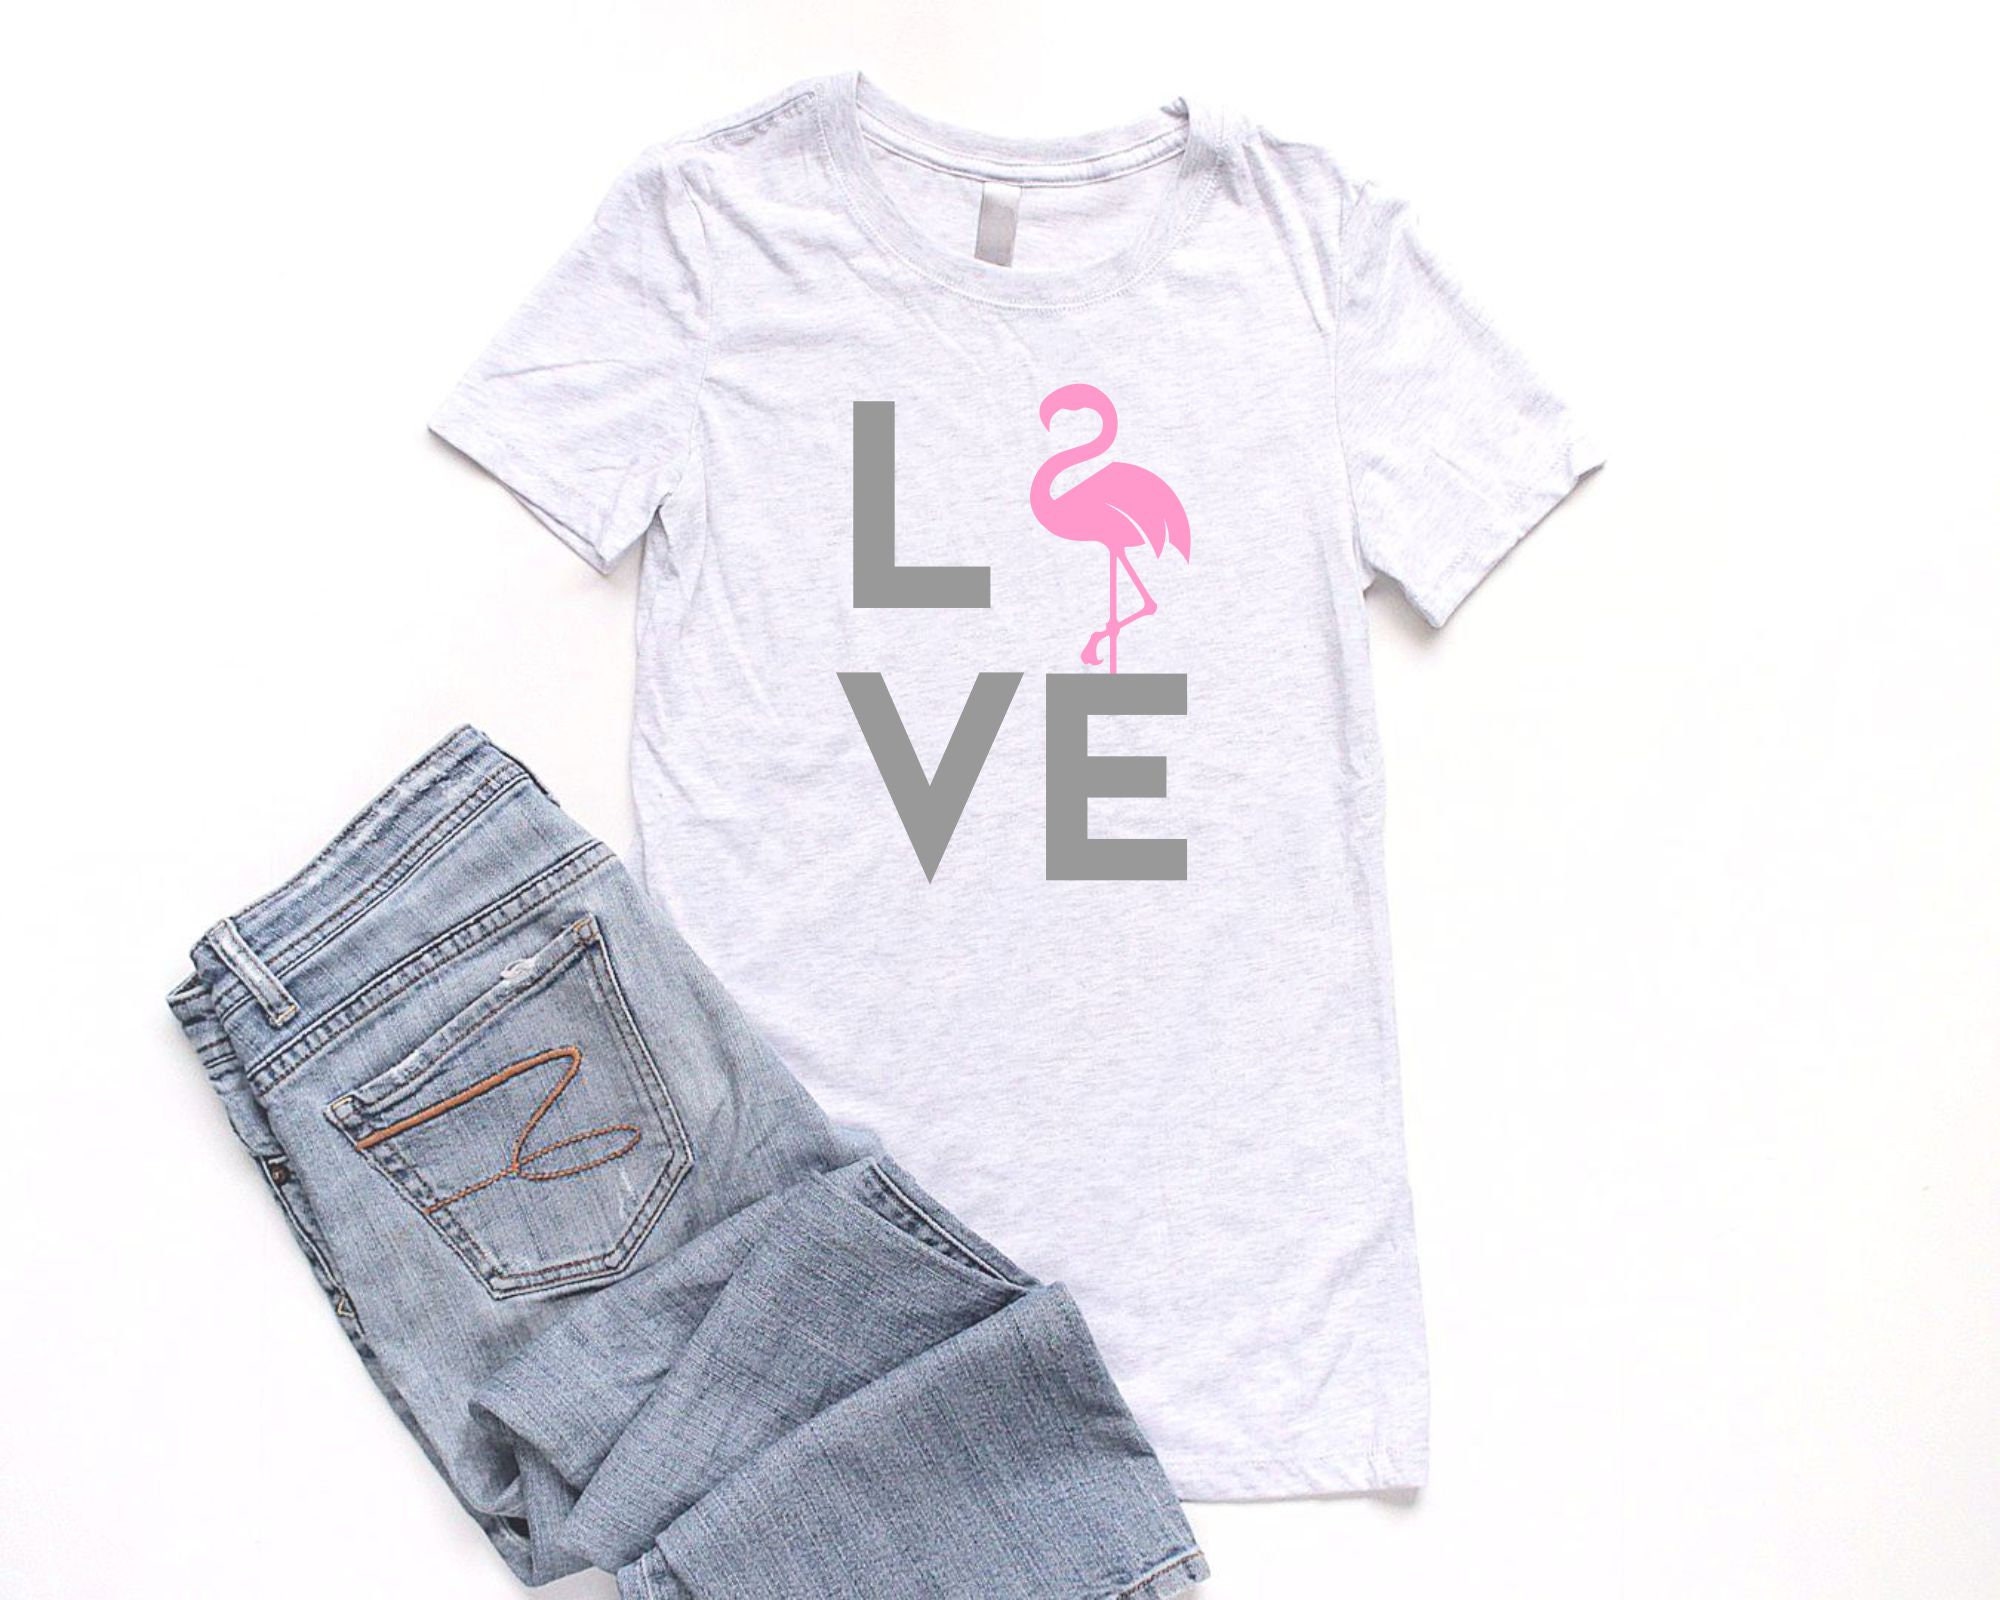 Flamingo Shirt LOVE Junior Fitted Pink Flamingo Party Shirts - Etsy